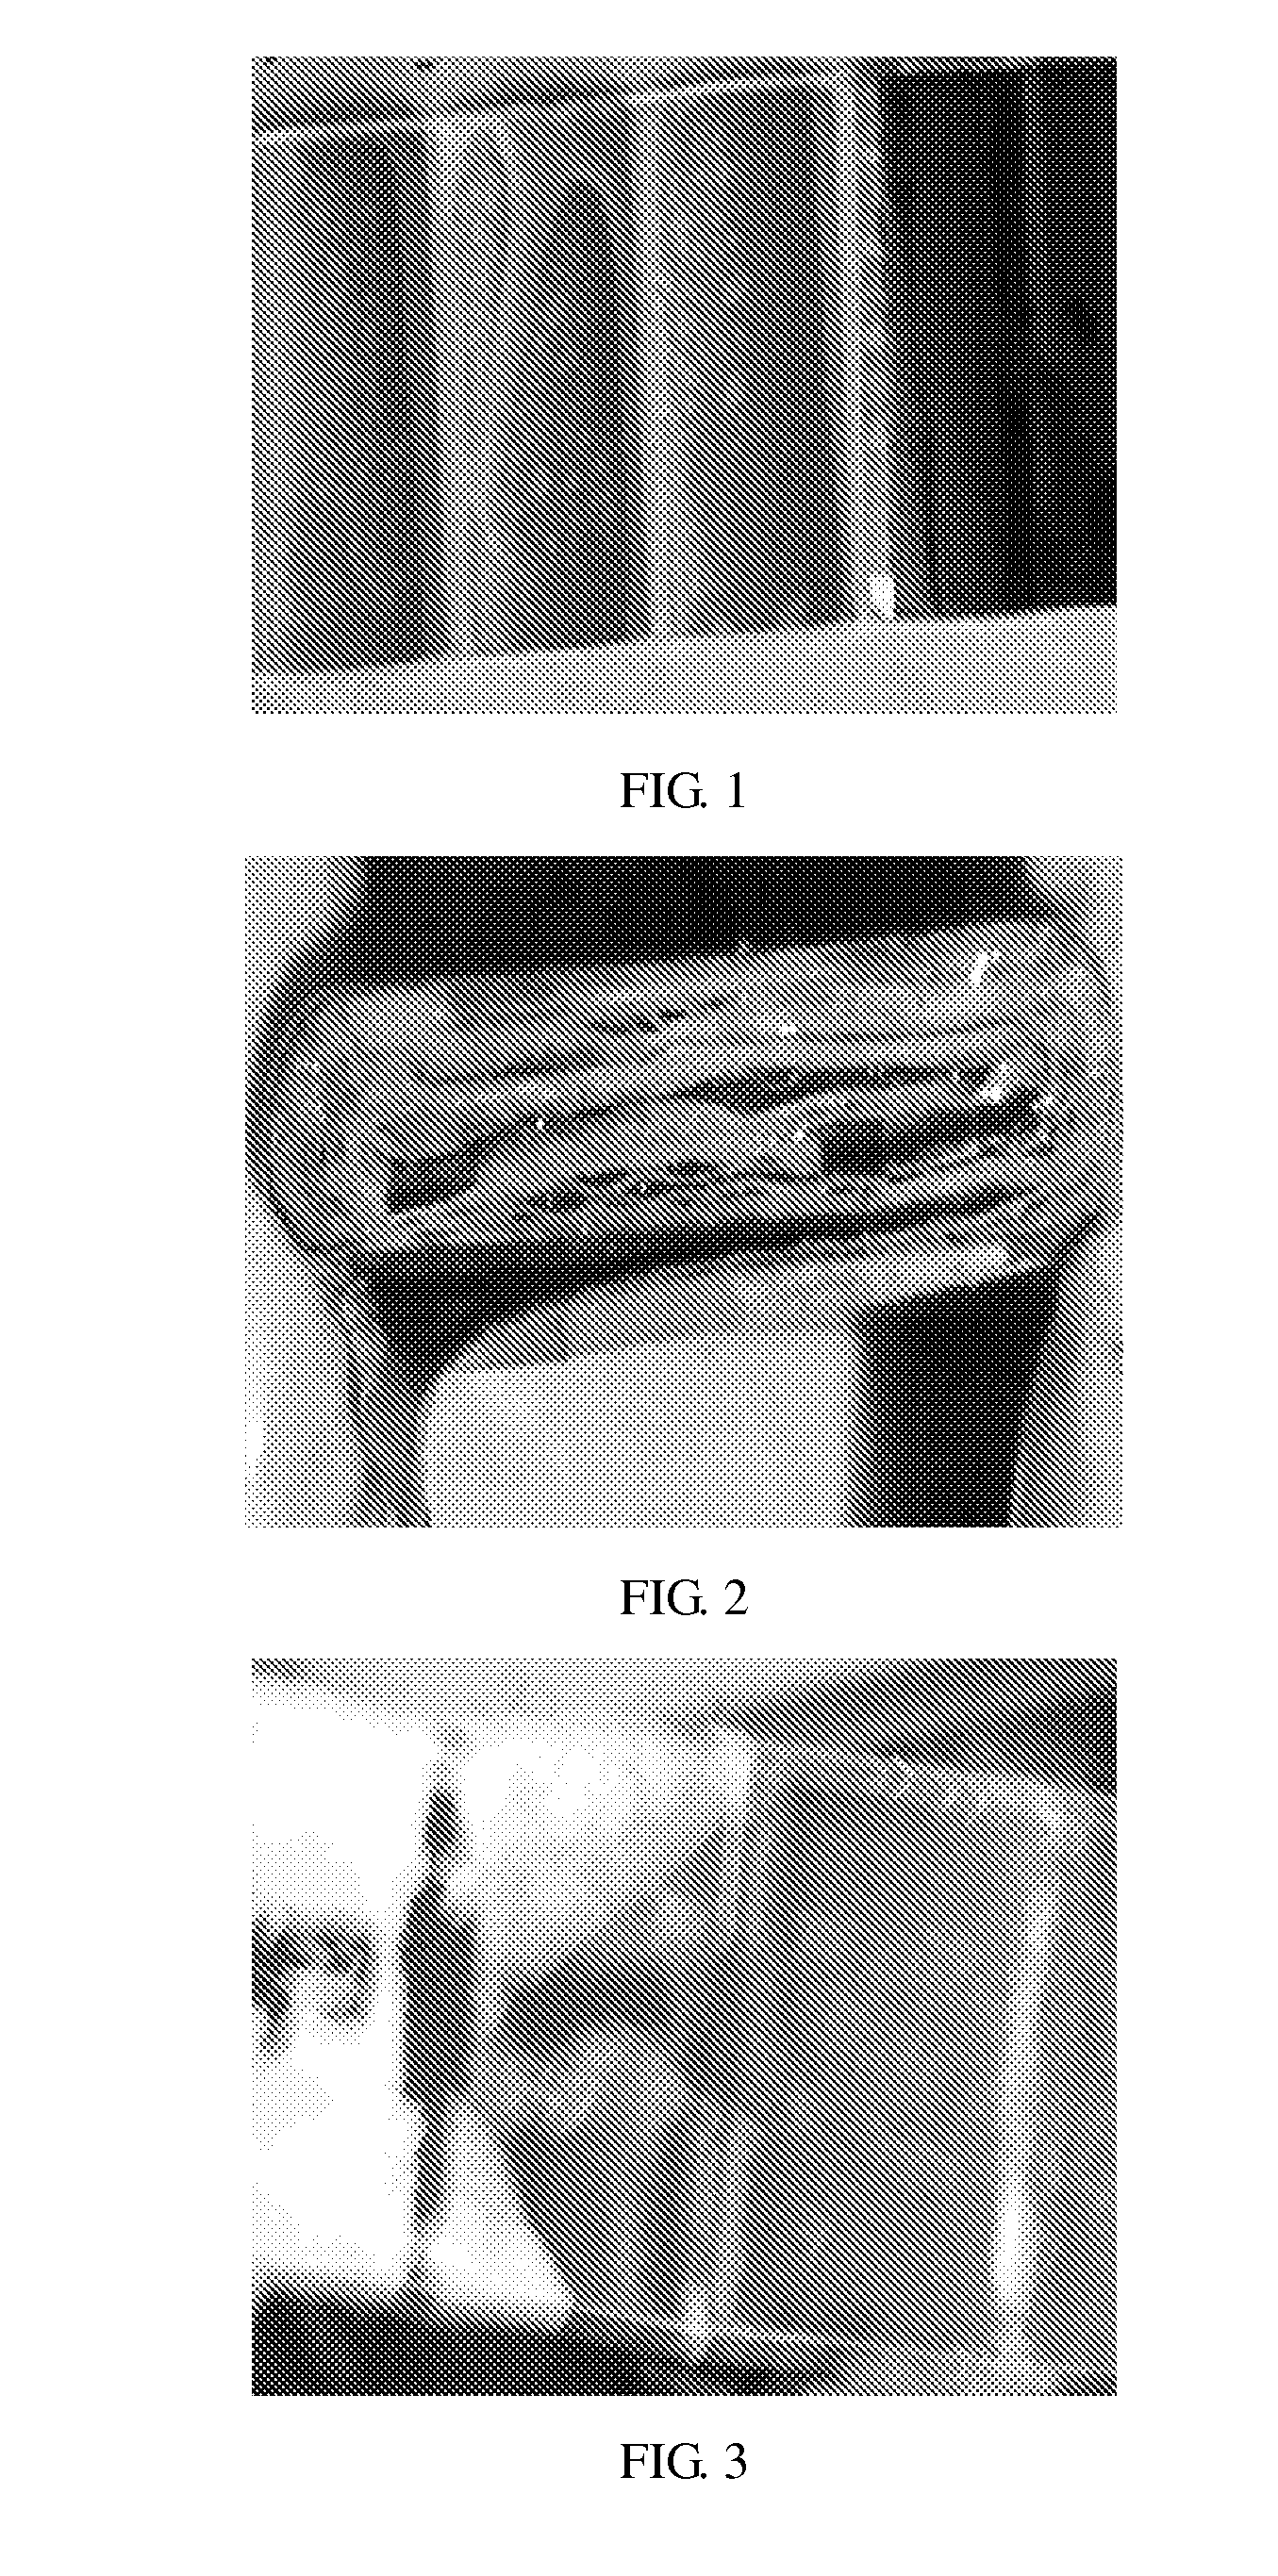 Polymer electrolyte for lithium battery and method for preparing lithium battery using same